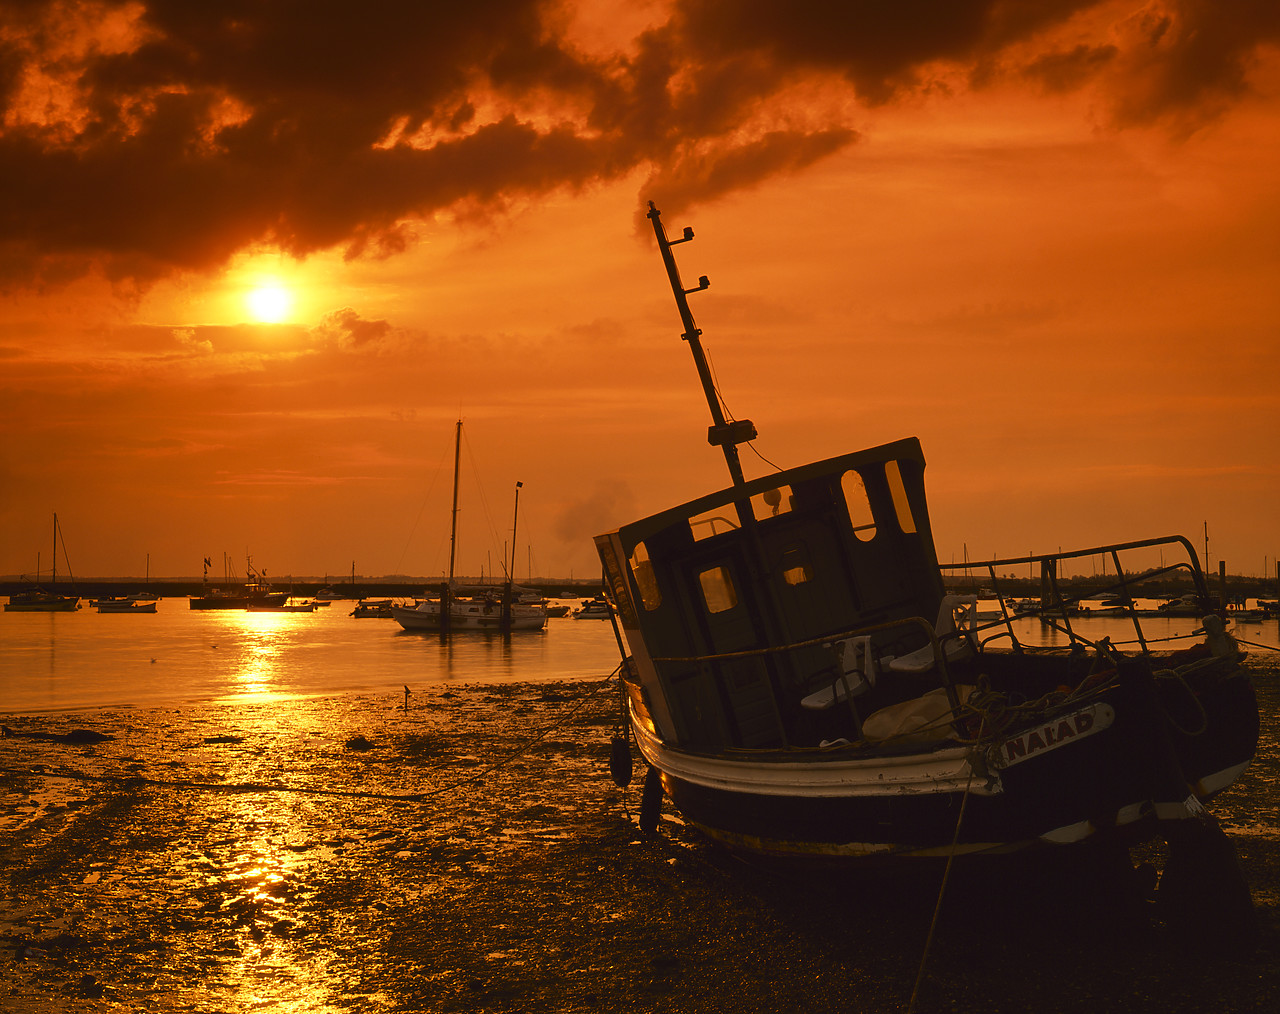 #903074-5 - Boats at Sunset, West Mersea, Essex, England